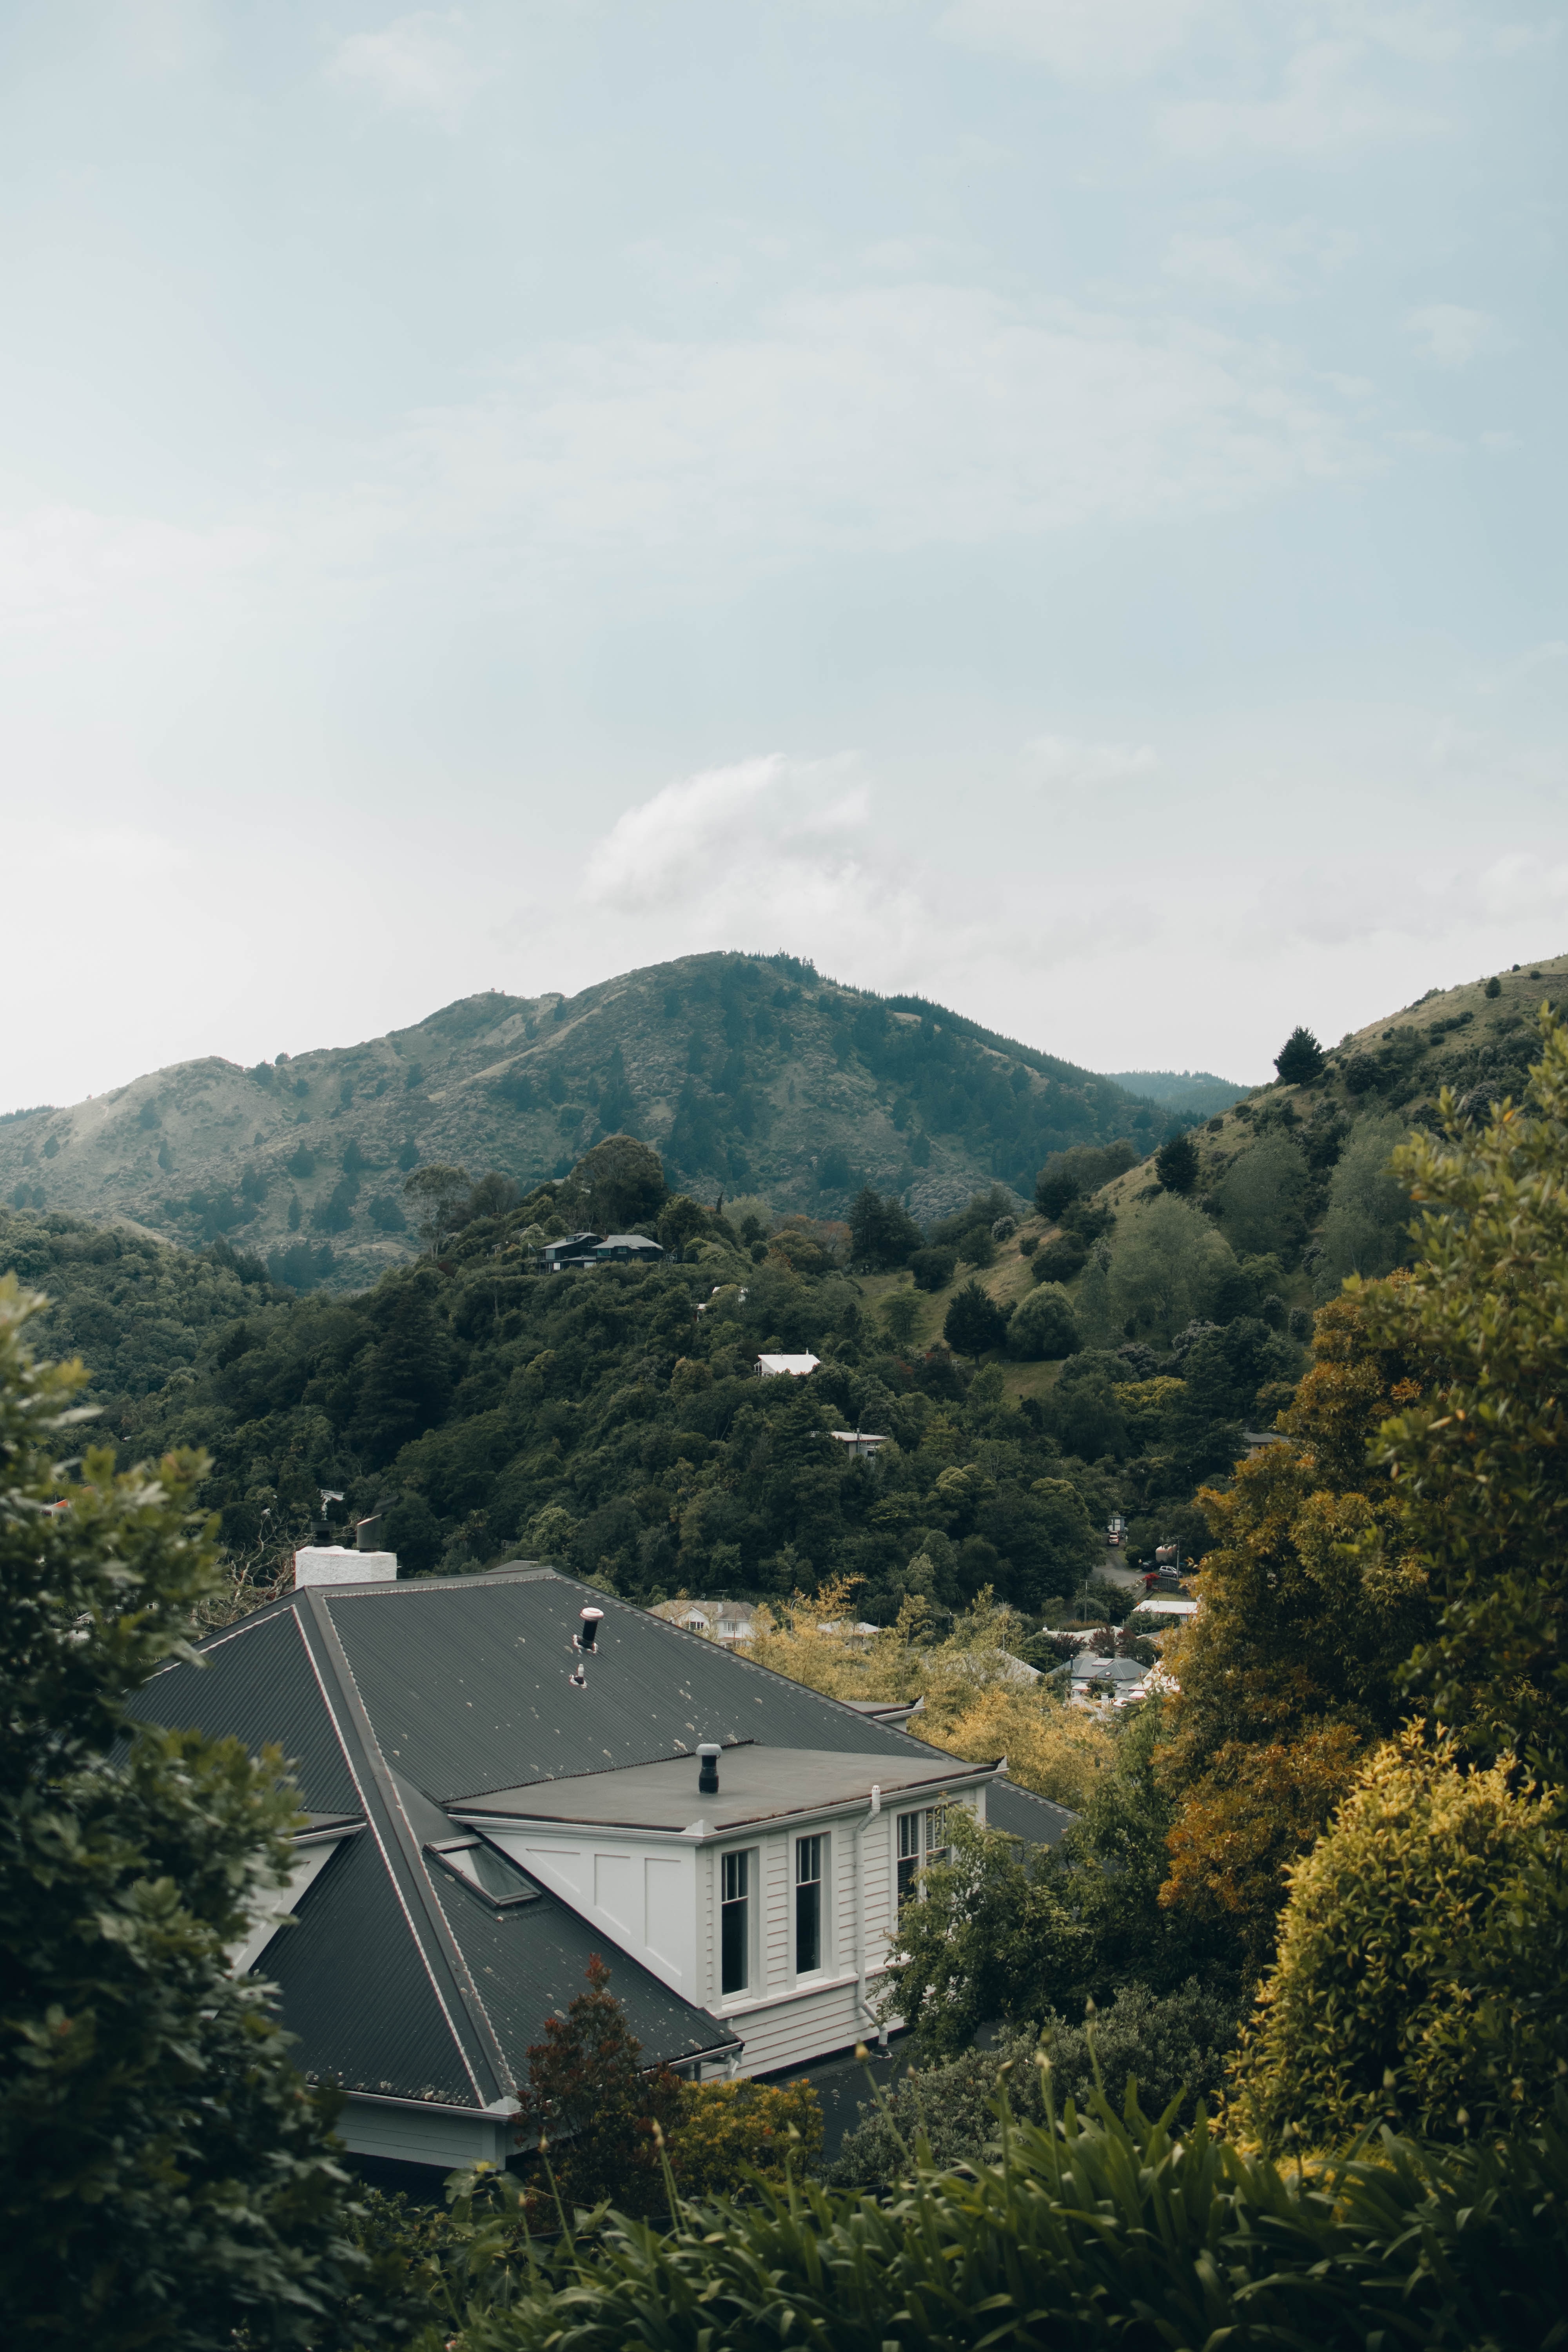 trees, nature, mountains, view from above, house images